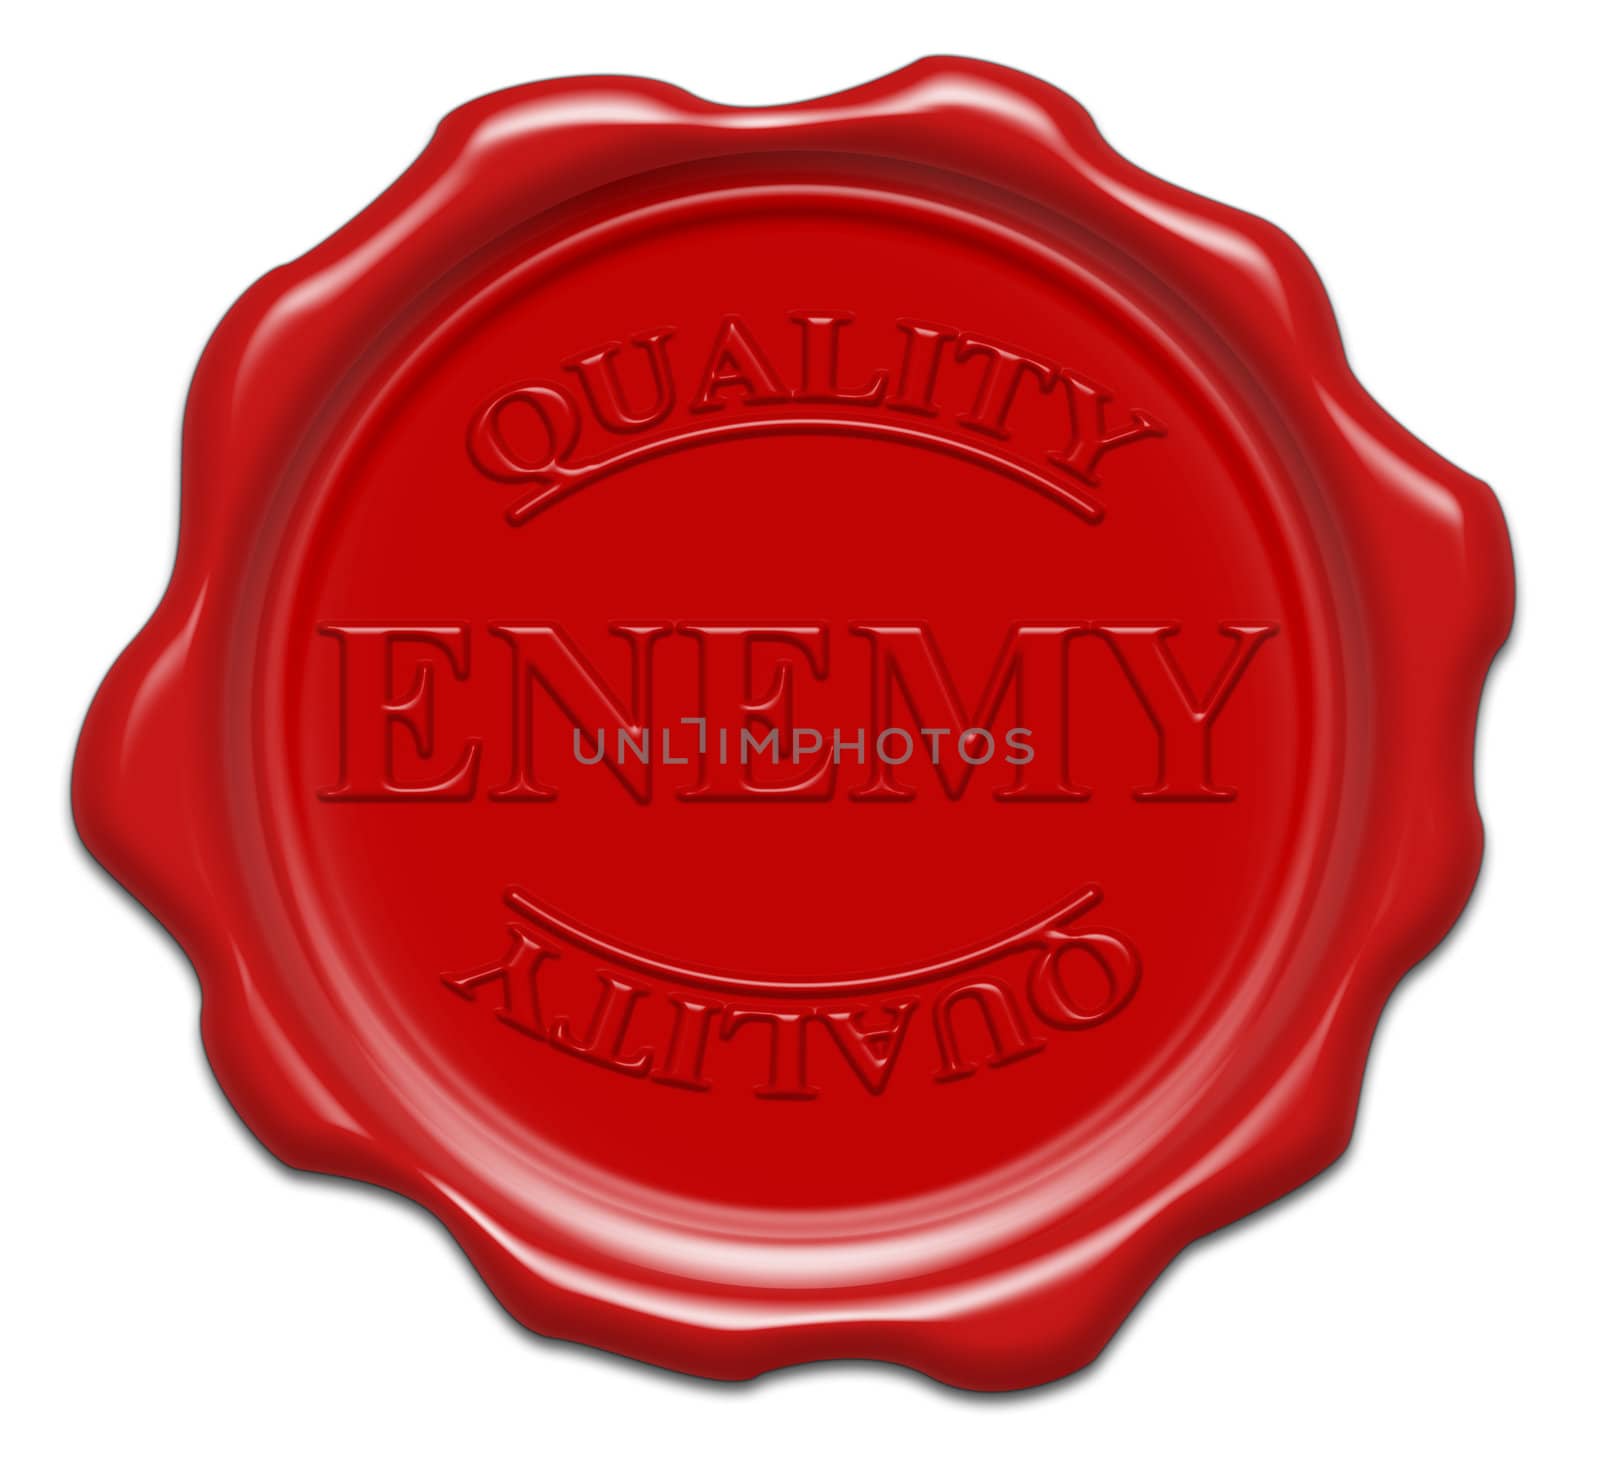 quality enemy - illustration red wax seal isolated on white background with word : enemy